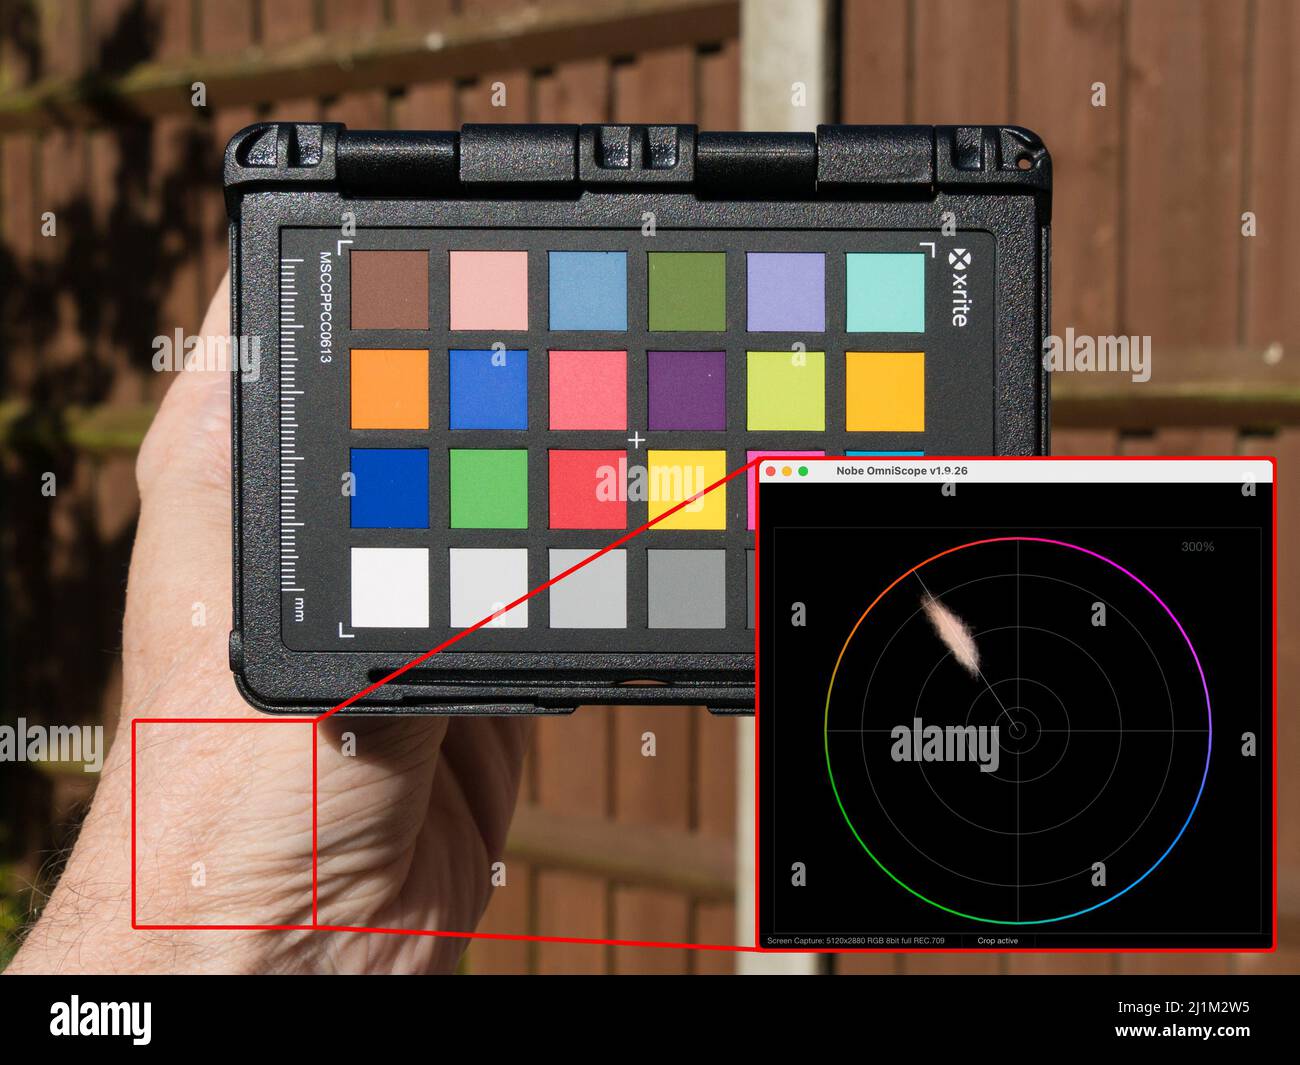 Image illustrates adjusting the white balance of an image using a Nobe Omniscope Vectorscope until skin colours lie on the skin hue line Stock Photo